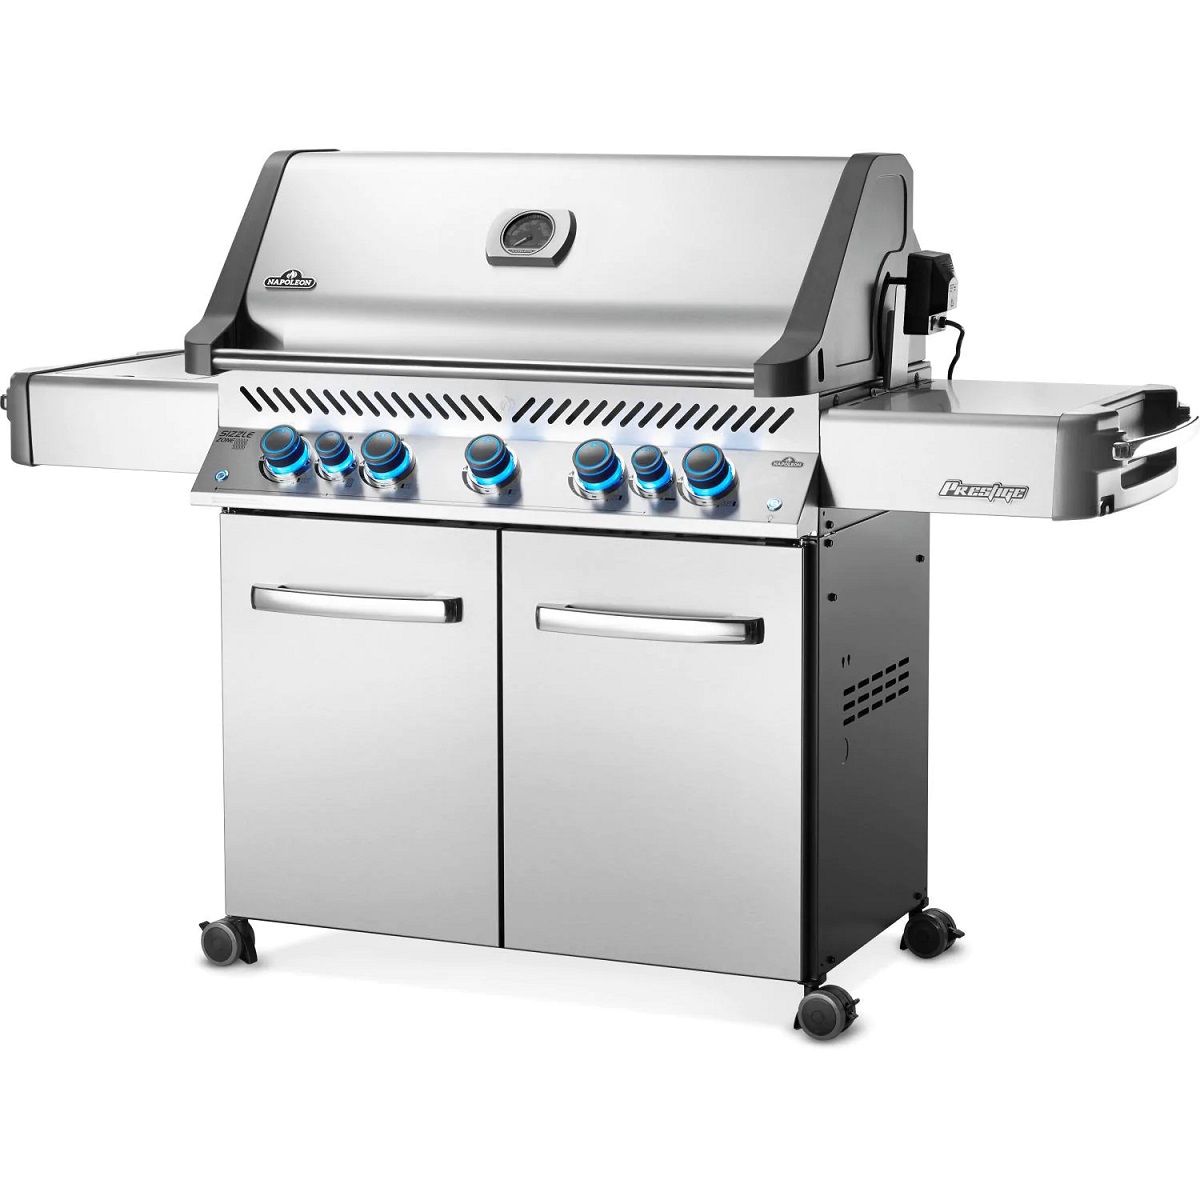 Napoleon Prestige 665 Propane Gas Grill with Infrared Rear Burner and Infrared Side Burner and Rotisserie Kit - P665RSIBPSS